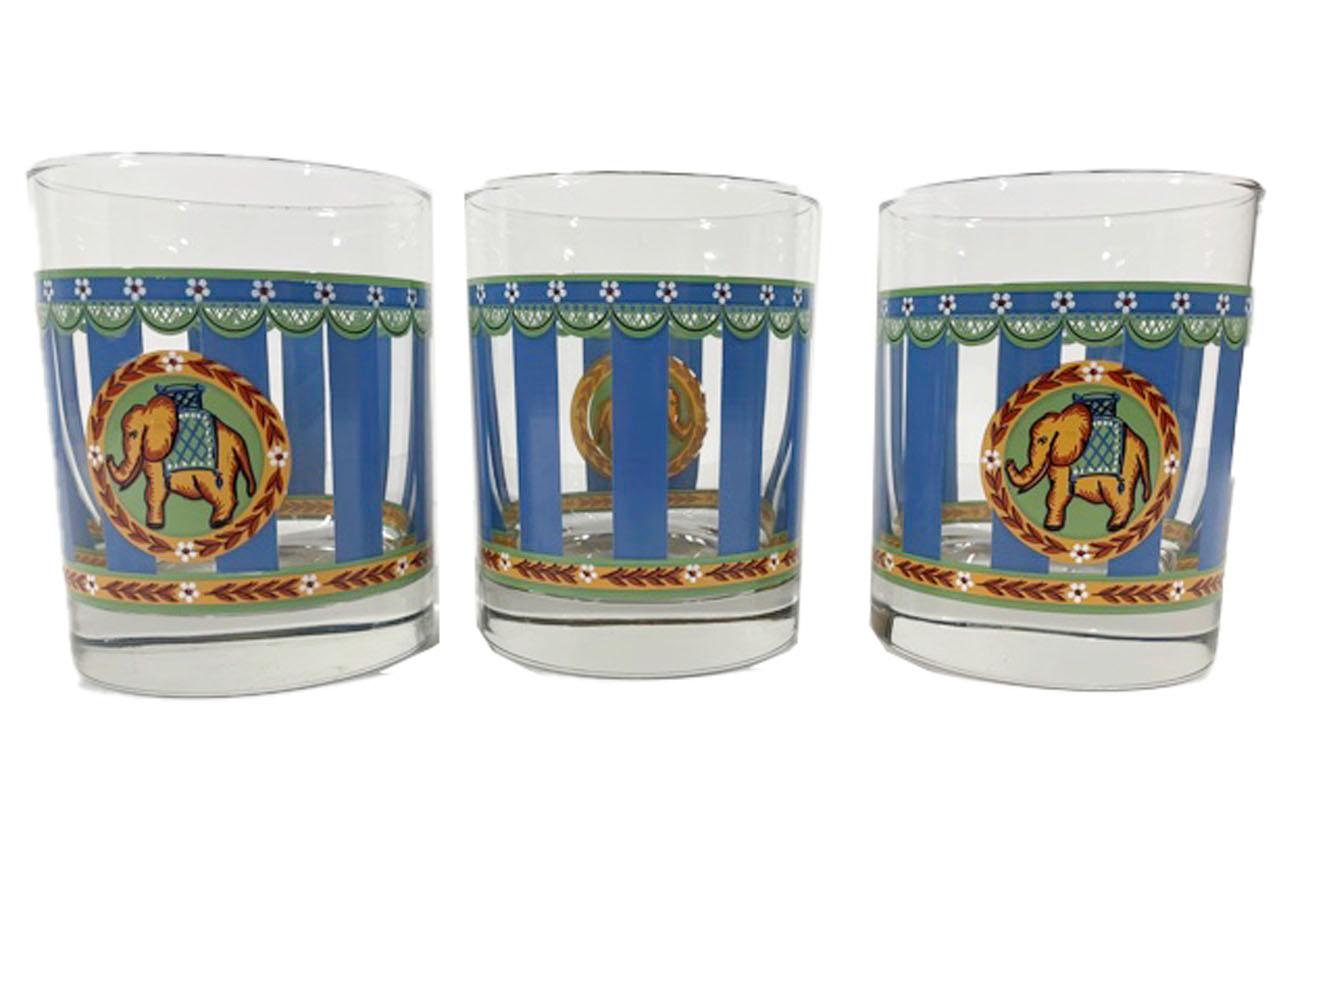 Vintage Rocks Glasses in Blue & Green Enamel with Elephant Medallions In Good Condition For Sale In Nantucket, MA